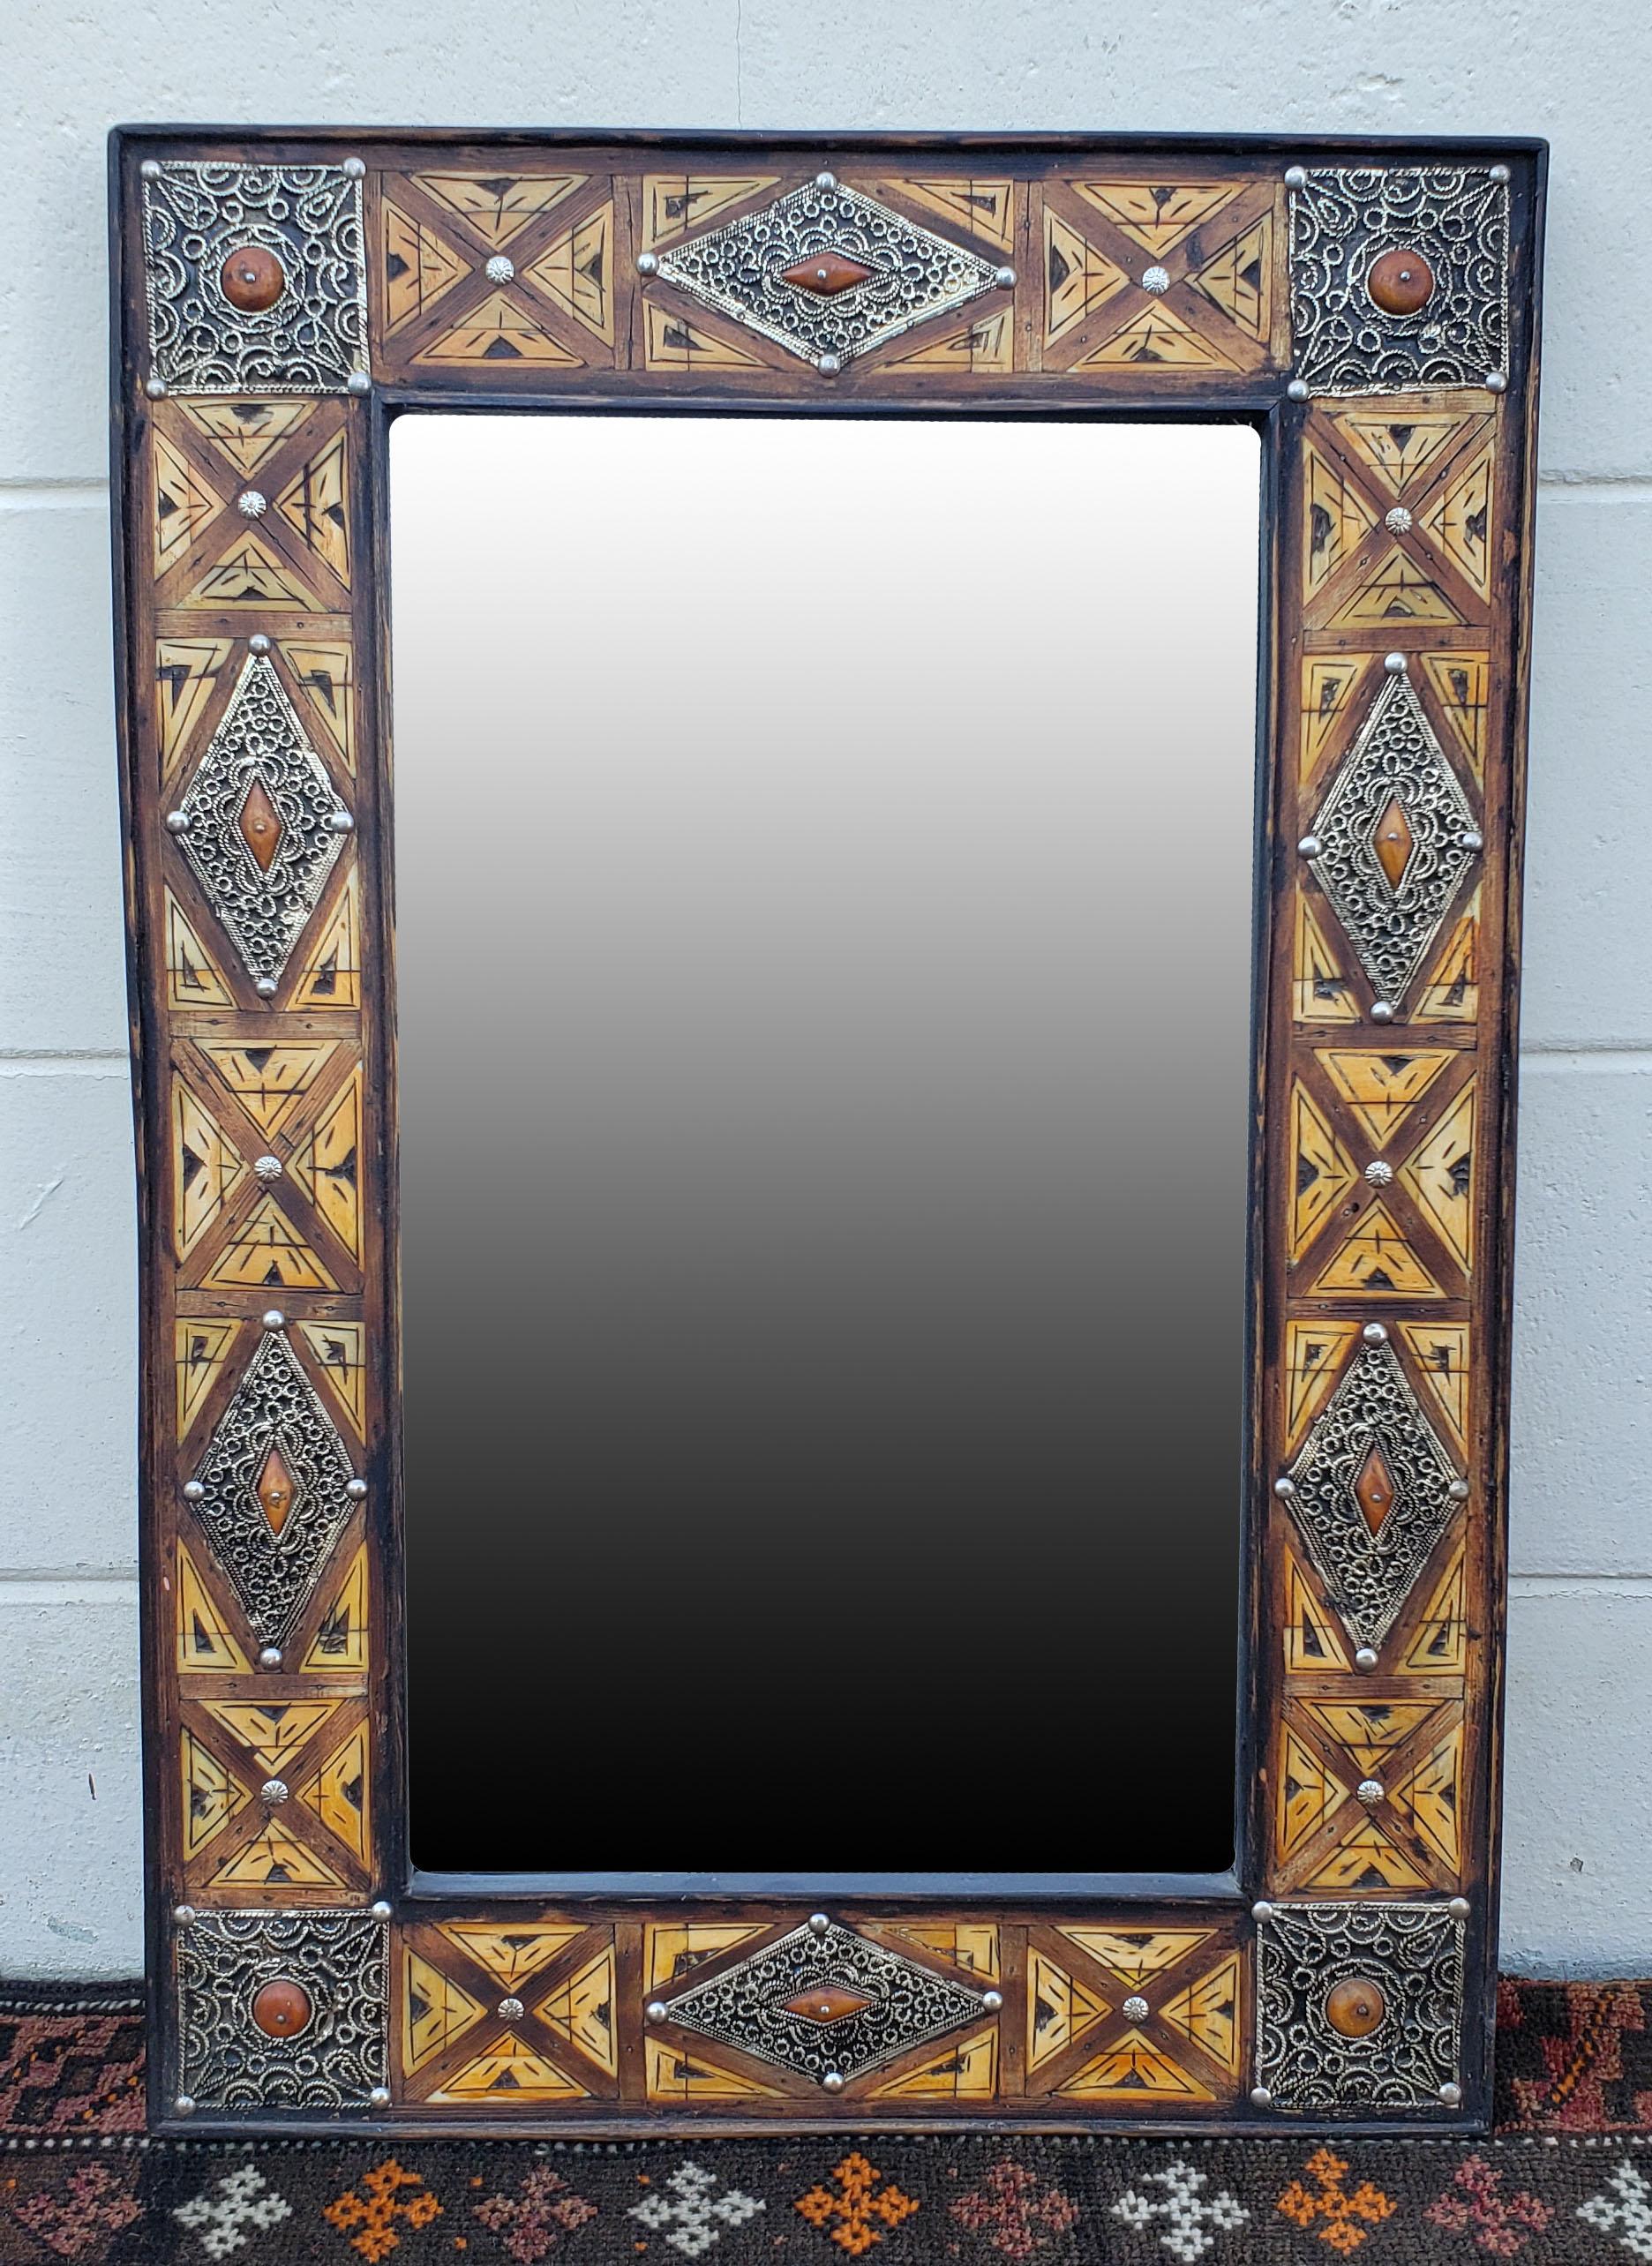 Medium size metal inlaid and camel bone Moroccan mirror. Made in the city of Marrakech. Rectangular shape measuring approximately 27